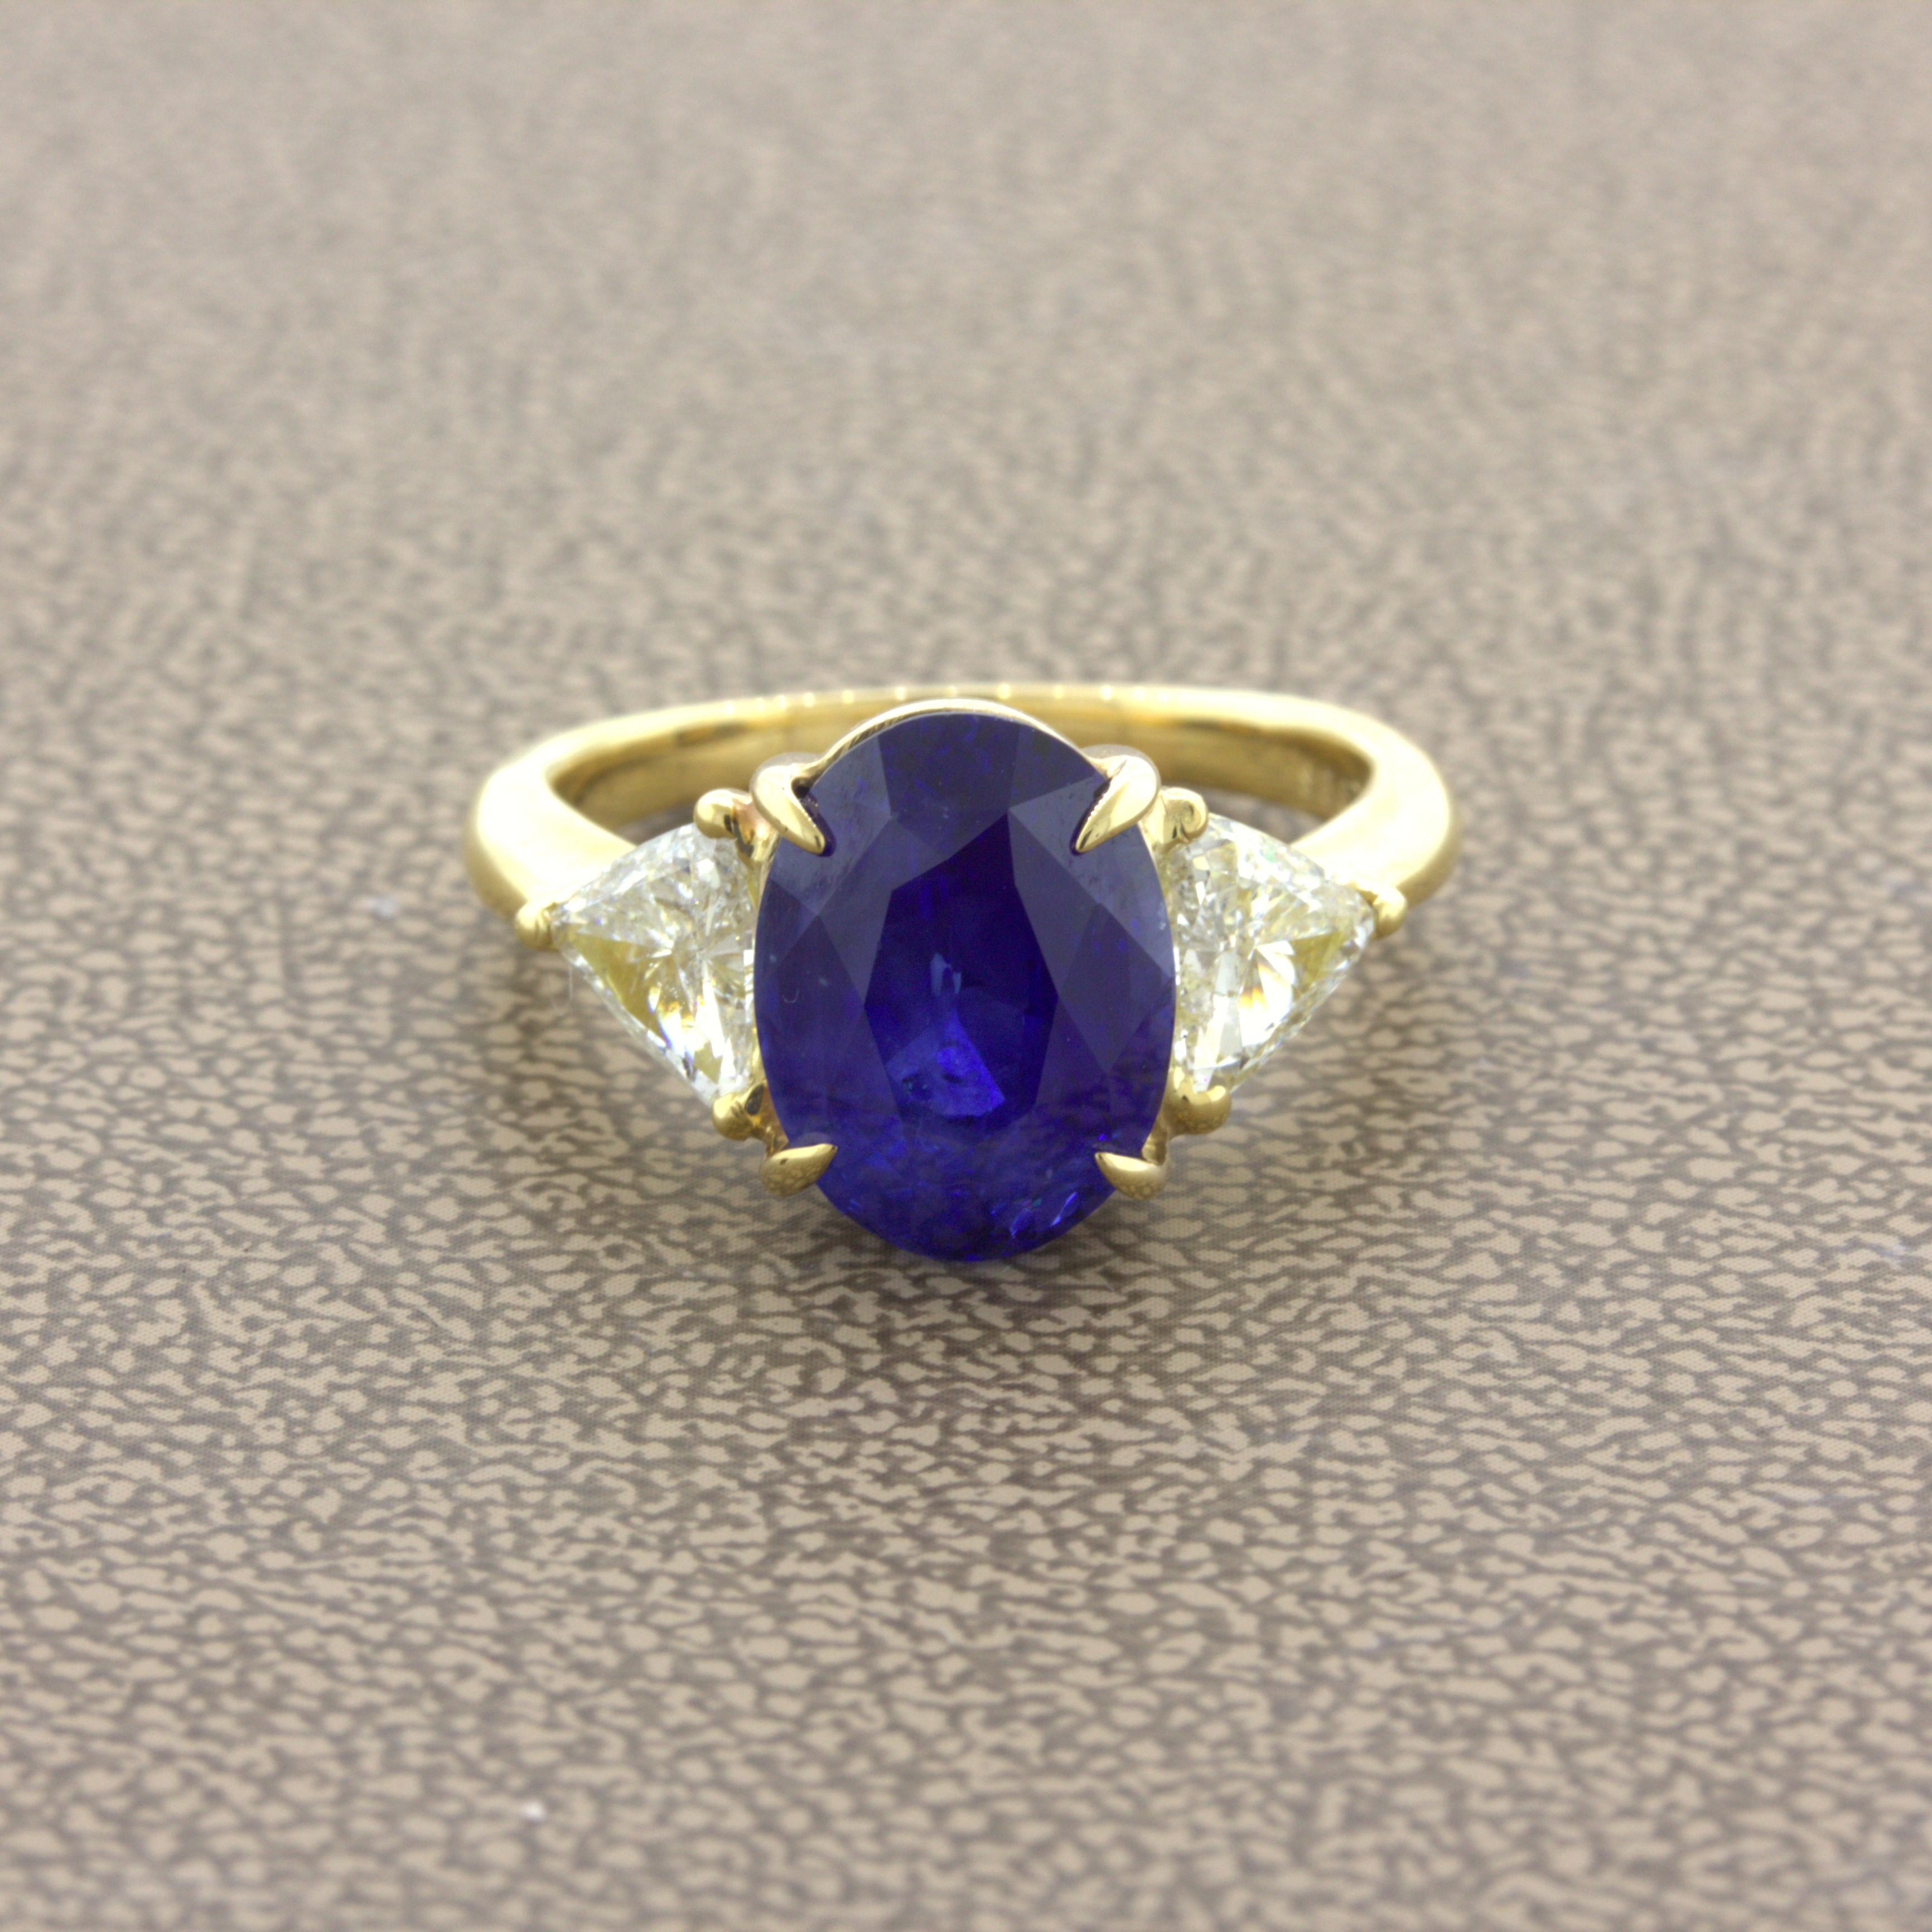 A rich and elegant blue sapphire weighing 5.87 carats takes center stage. The oval-shaped gem has a rich vivid blue color that glows in the light. We consider this fine color peacock blue for its intensity. It is complemented by two trillion-cut